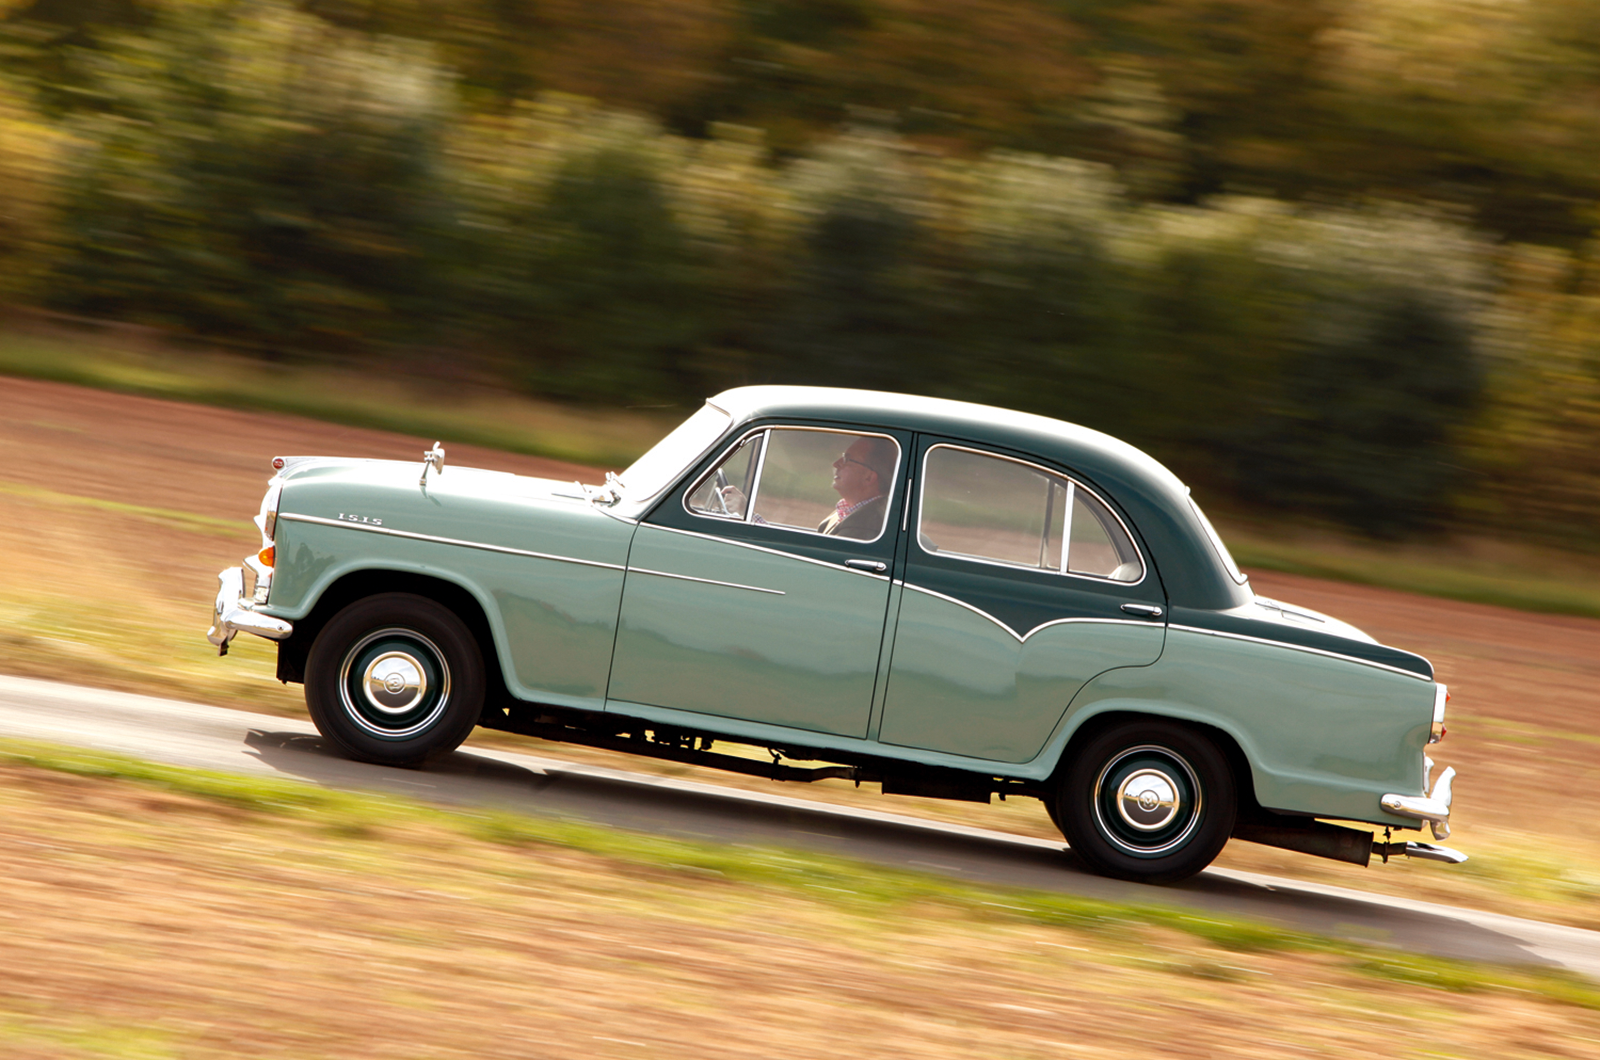 Classic & Sports Car – Buyer’s guide: Austin Cambridge & Westminster